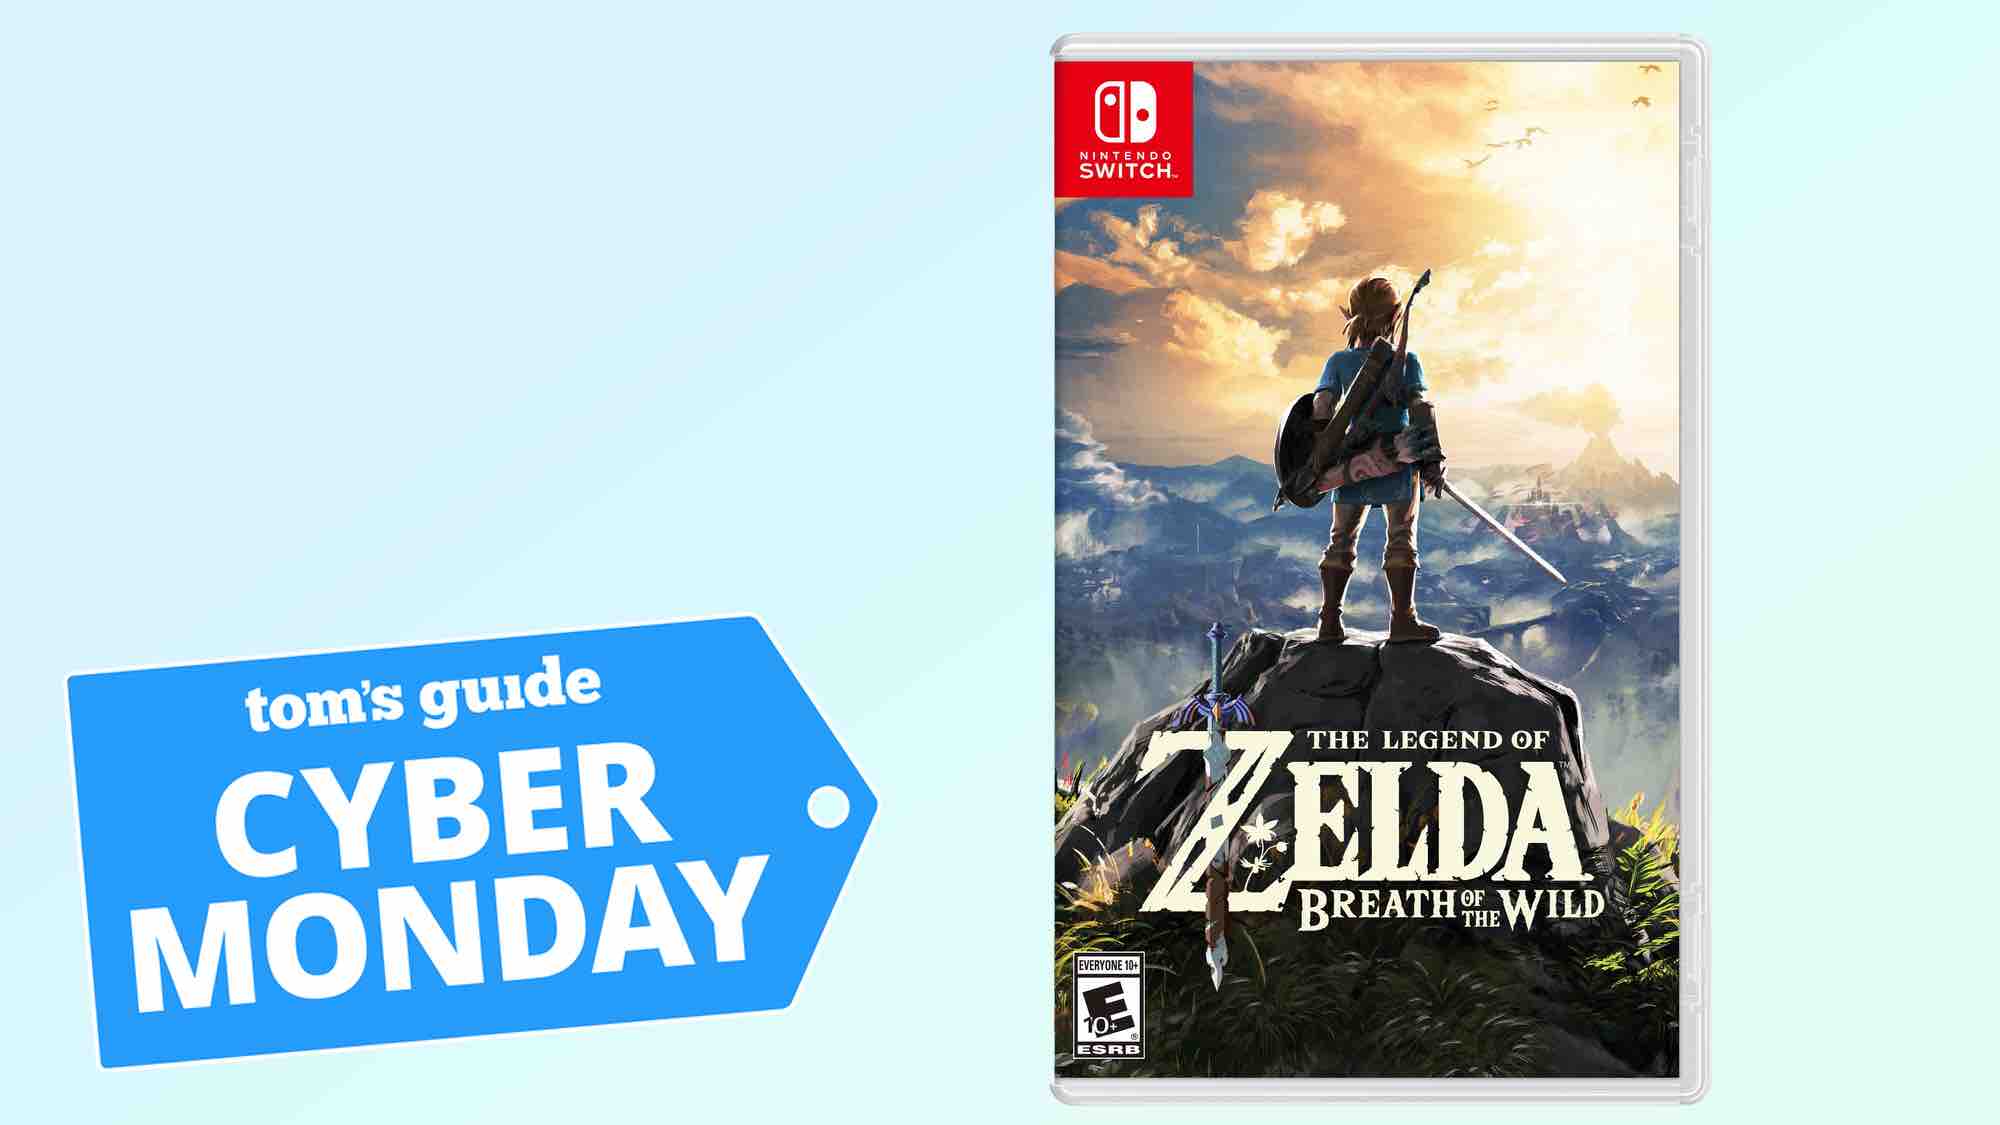 Legend of Zelda: Breath of the Wild for Switch with Cyber Monday badge